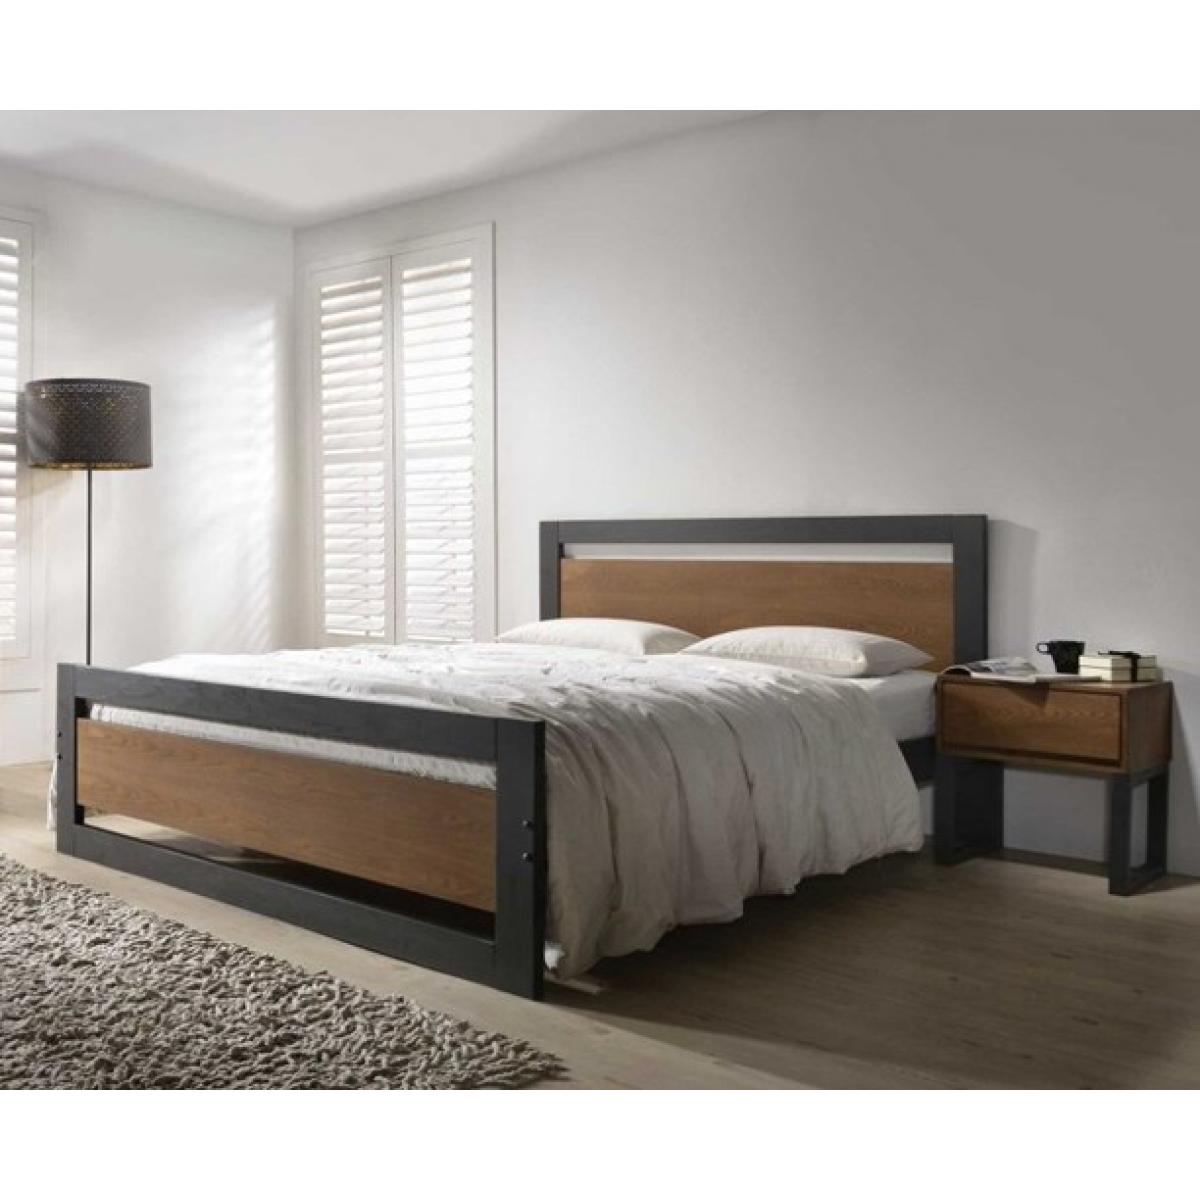 Vicente Dark Grey Wooden Bed With, Grey Wooden Bed Frame